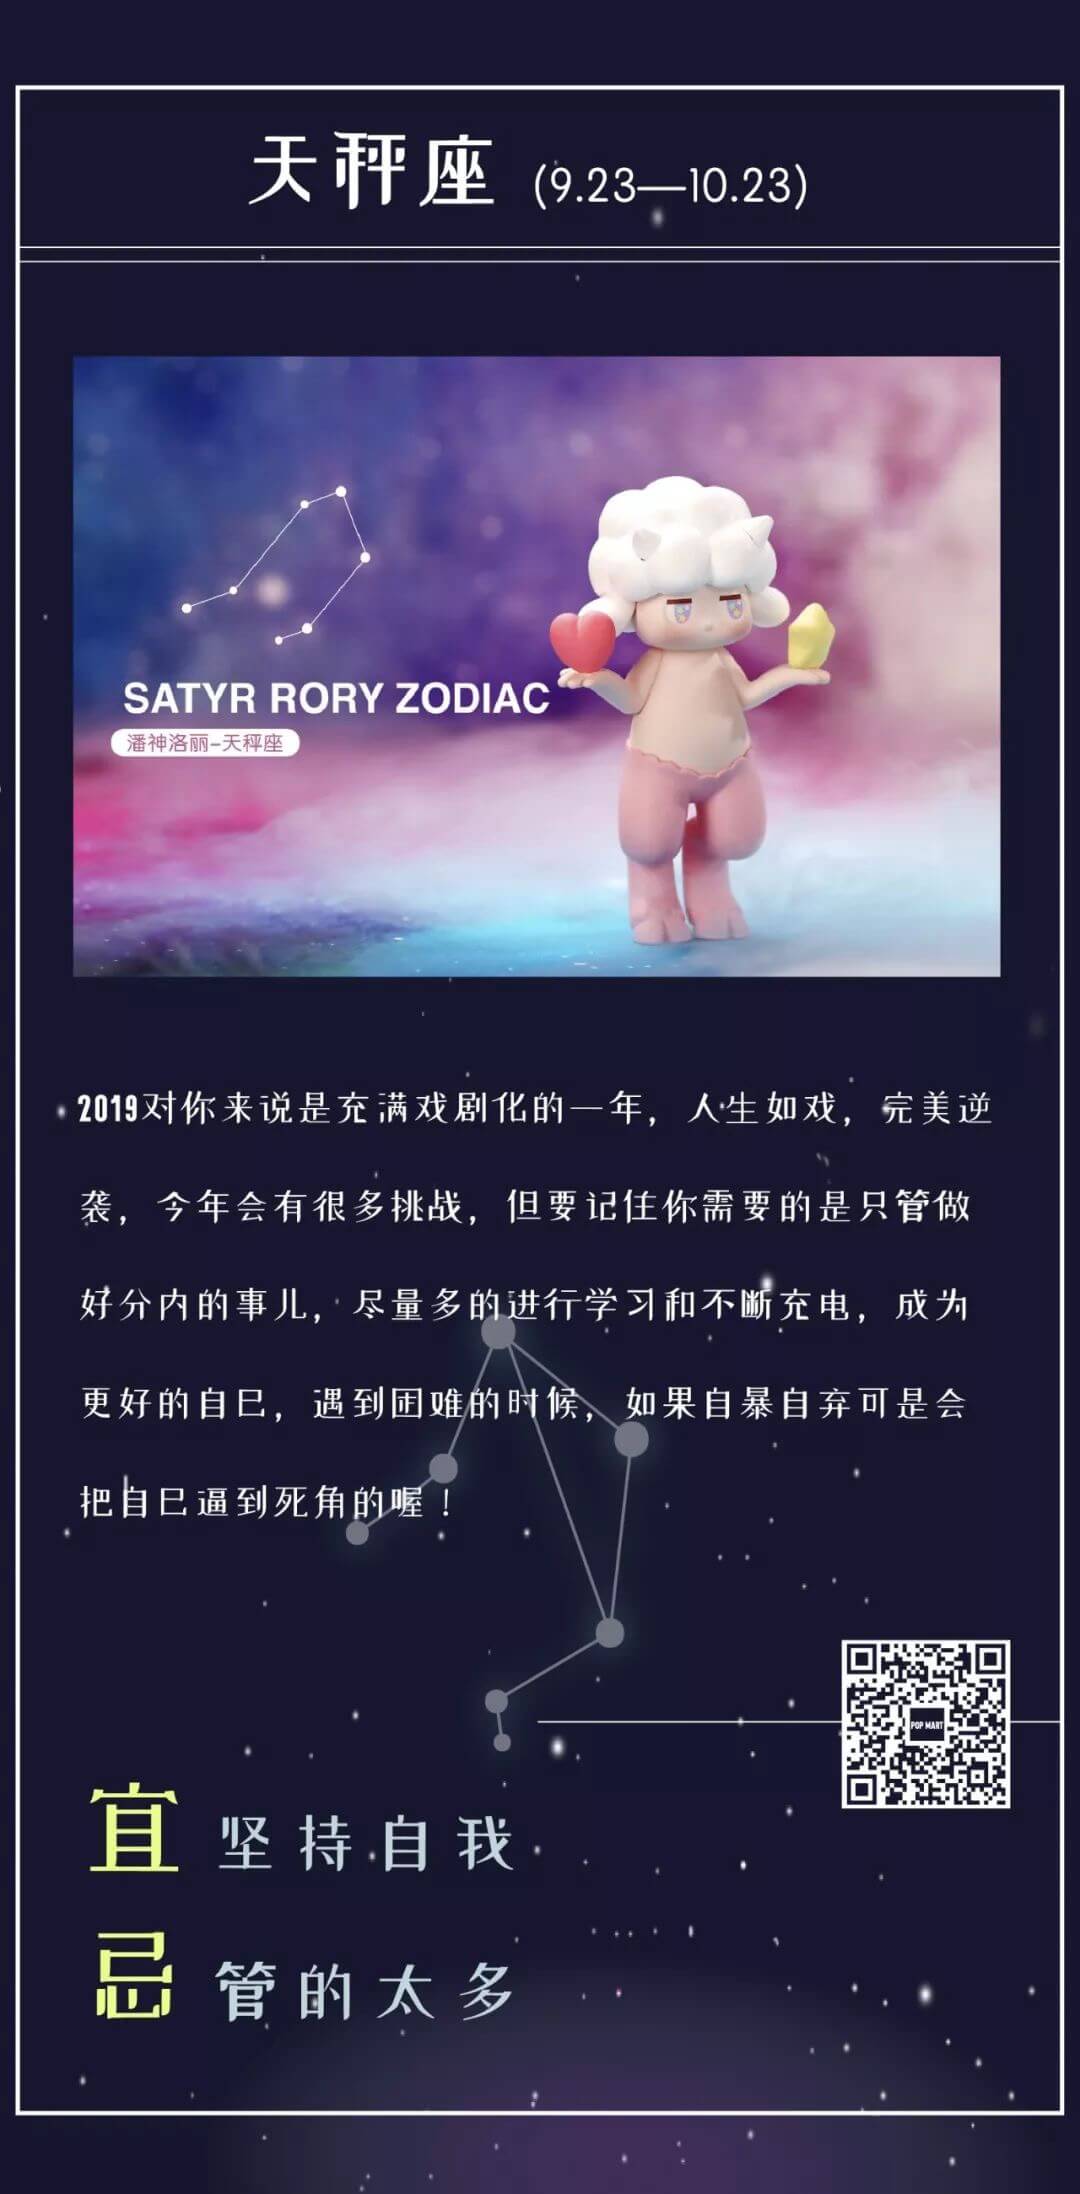 Satyr-Rory-Zodic-Edition-Mini-Series-by-Seulgie-Lee-x-POP-MART-the-toy-chronicle-2019-rrrr